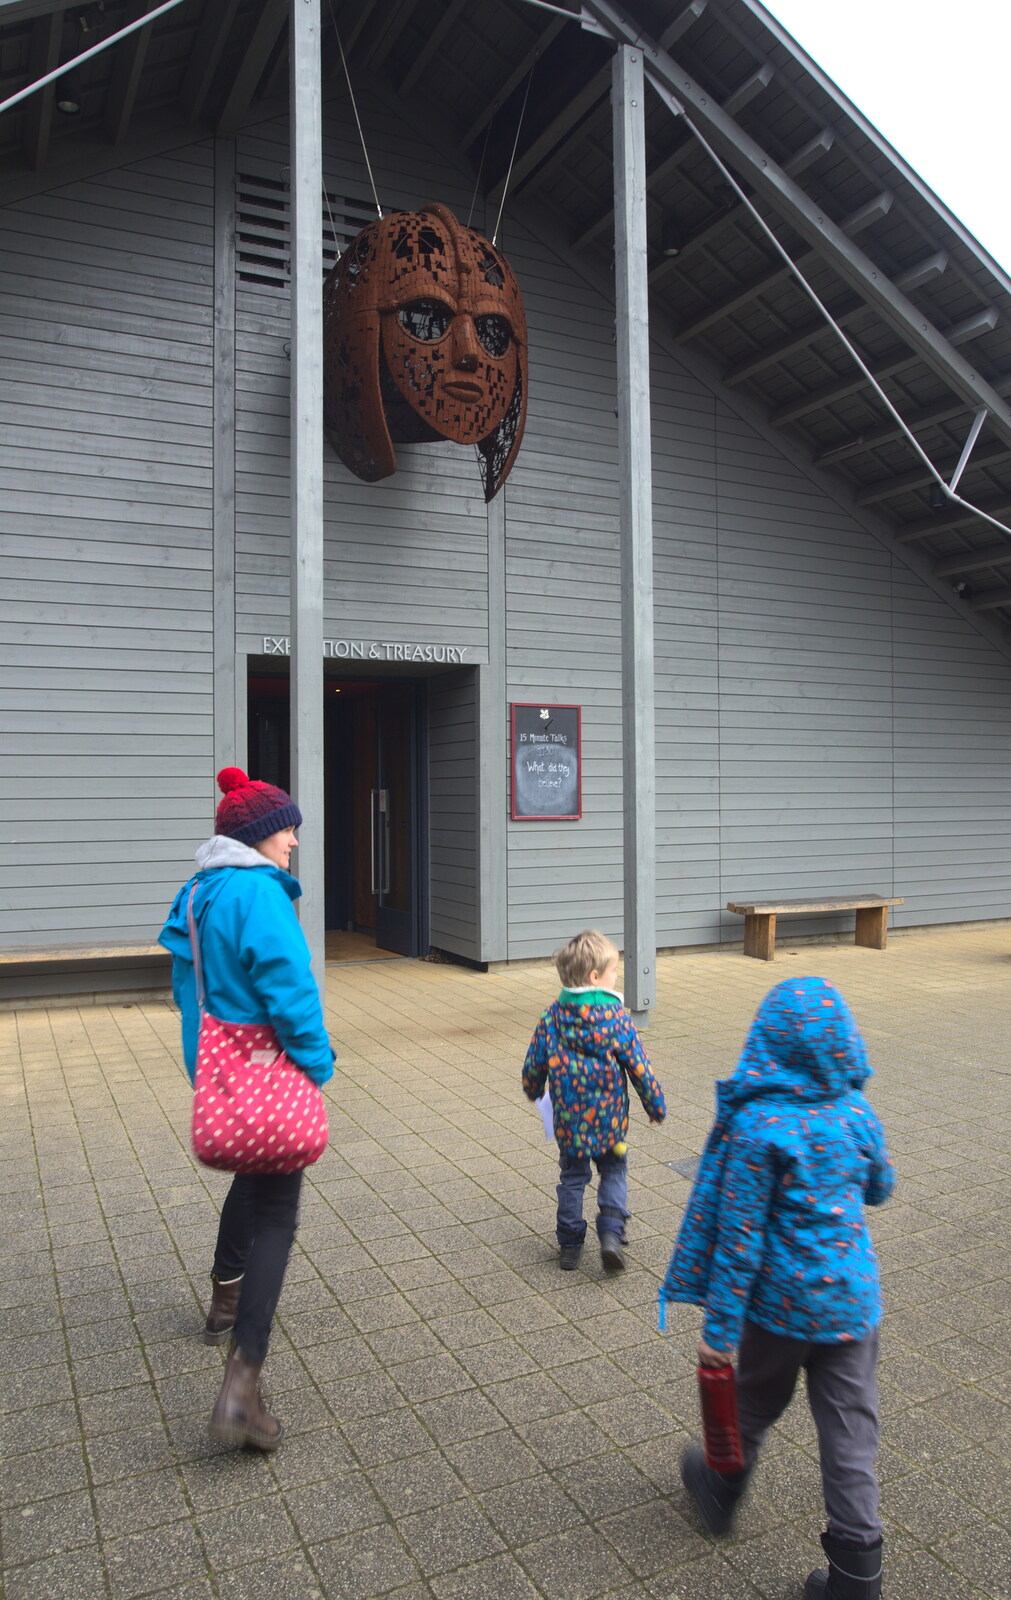 We head towards the exhibition and treasury from A Trip to Sutton Hoo, Woodbridge, Suffolk - 29th January 2017